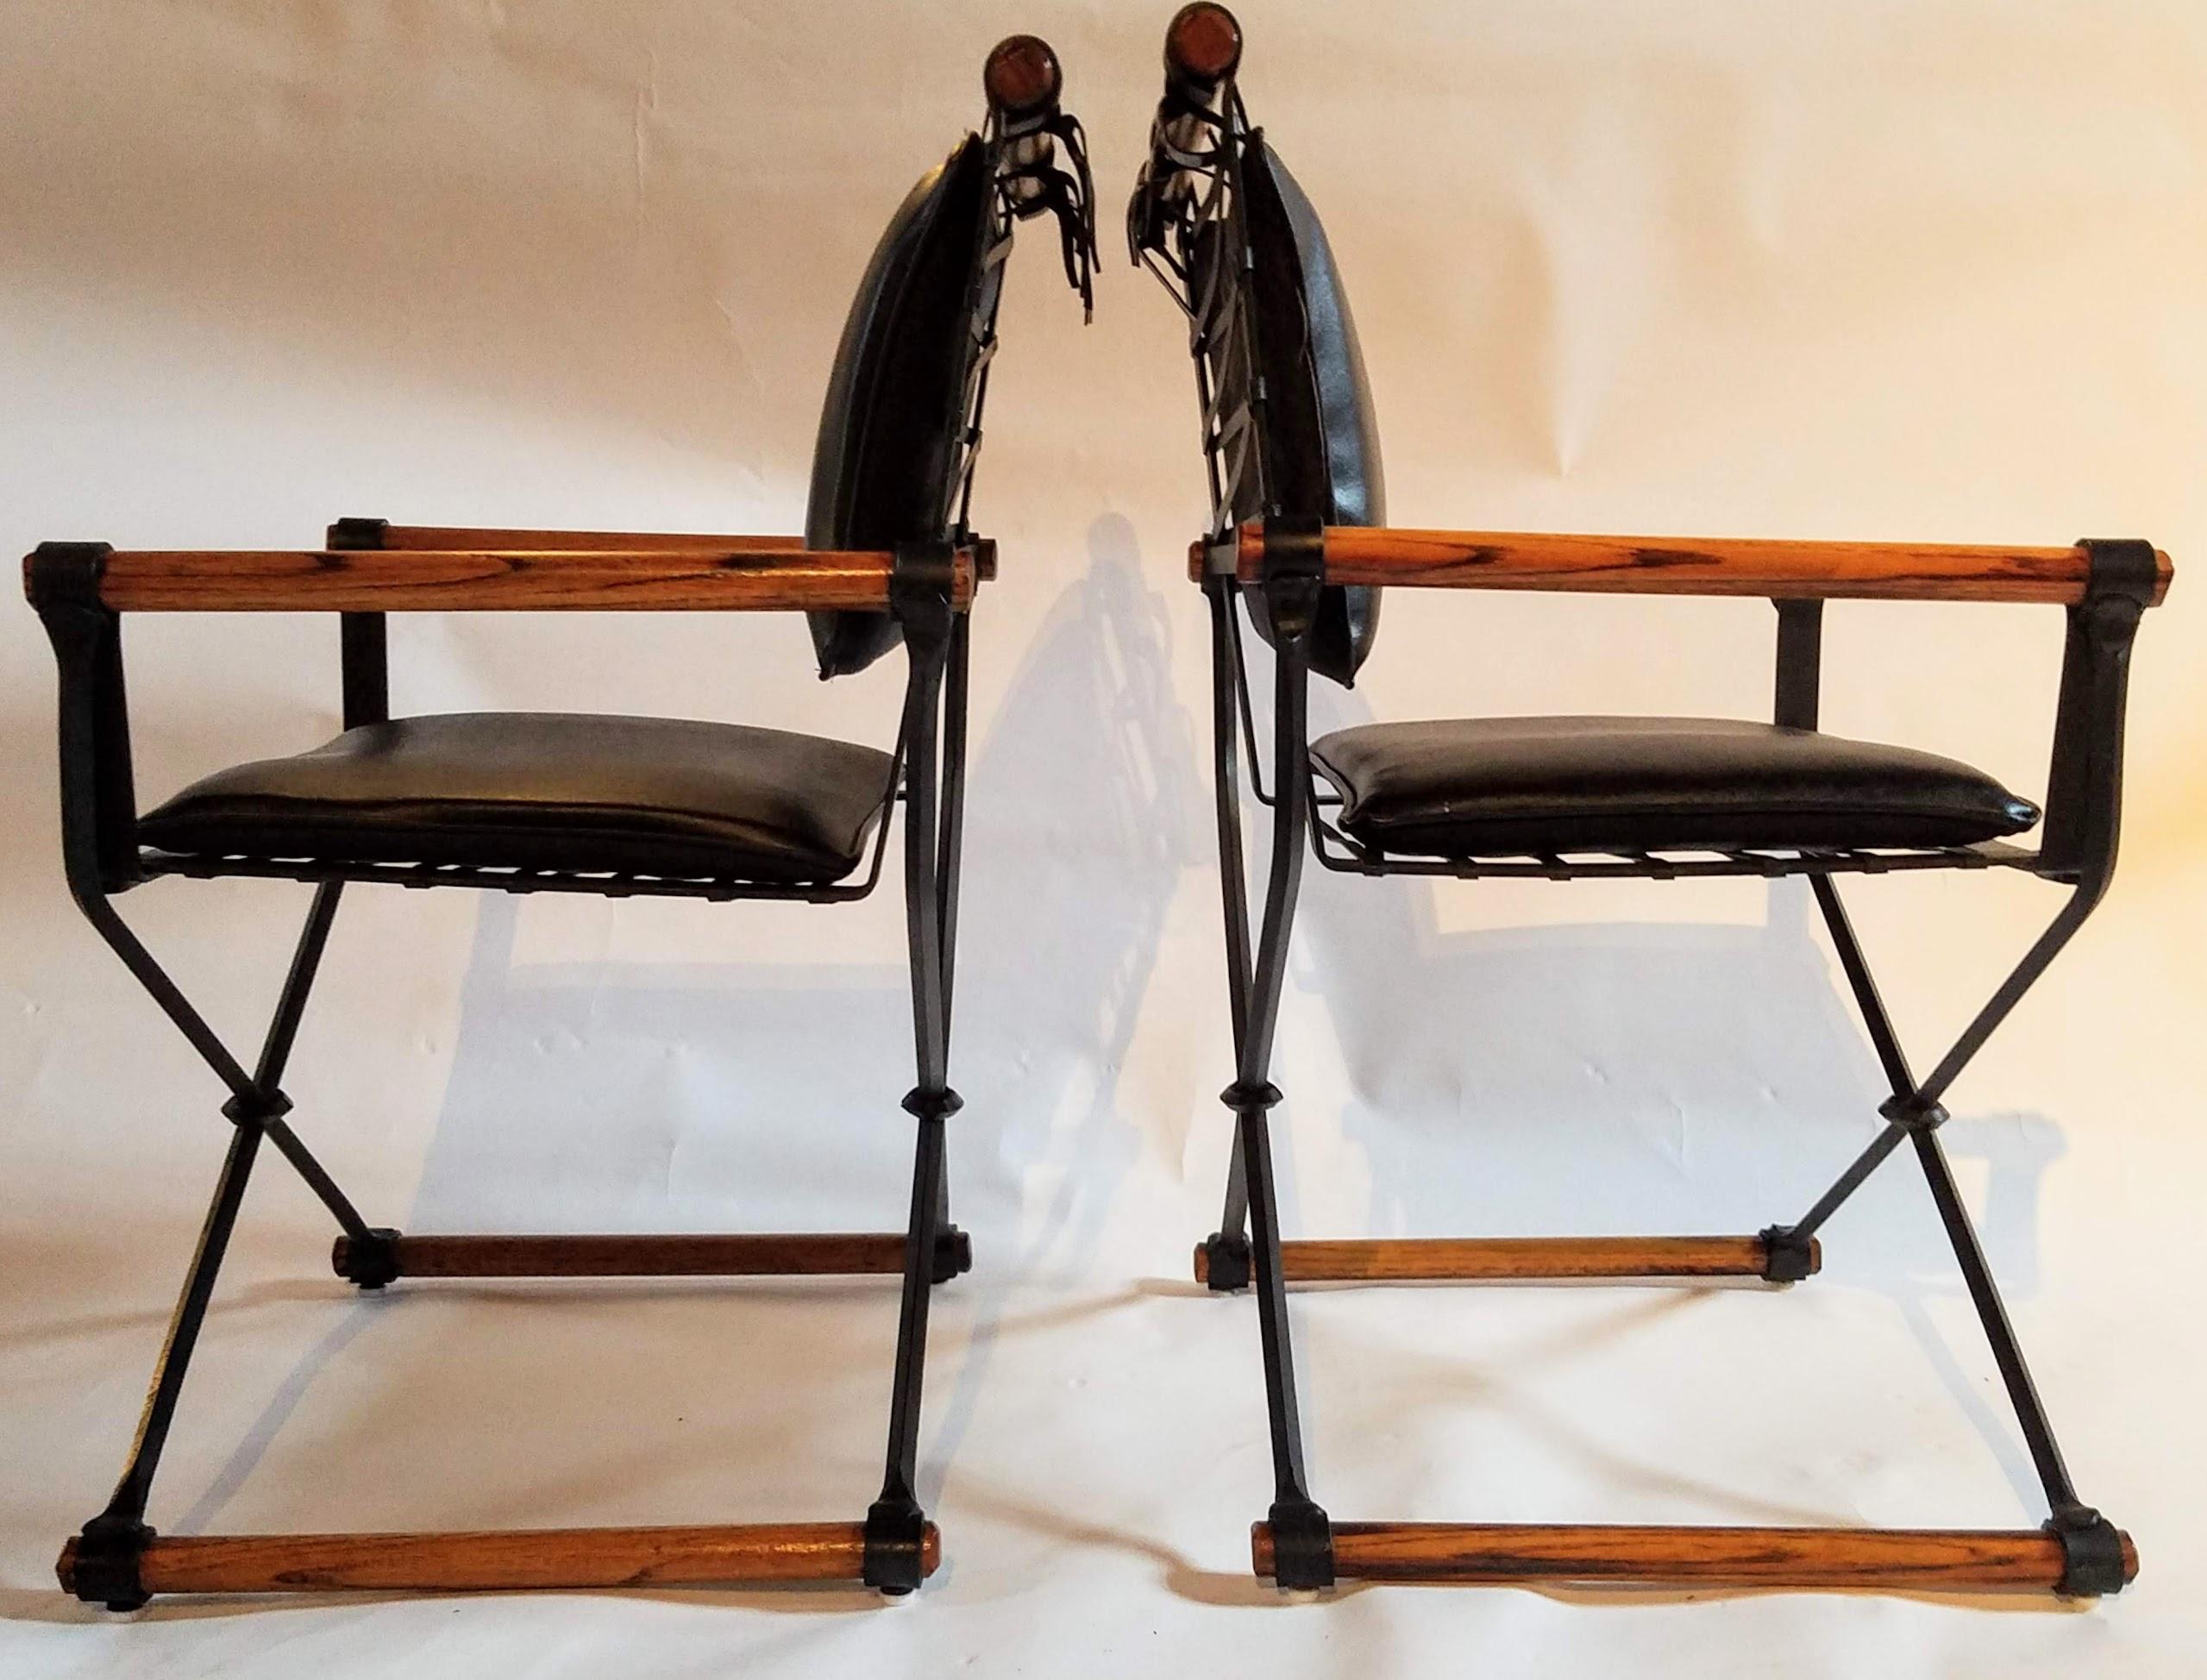 Cleo Baldon pair of handcrafted Campaign chairs from her contract line manufactured by Terra in the mid-1960s thru the mid-1970s.
The wrought iron chairs are lacquered in their original black color with fumed oak rods and bridle ties on the back